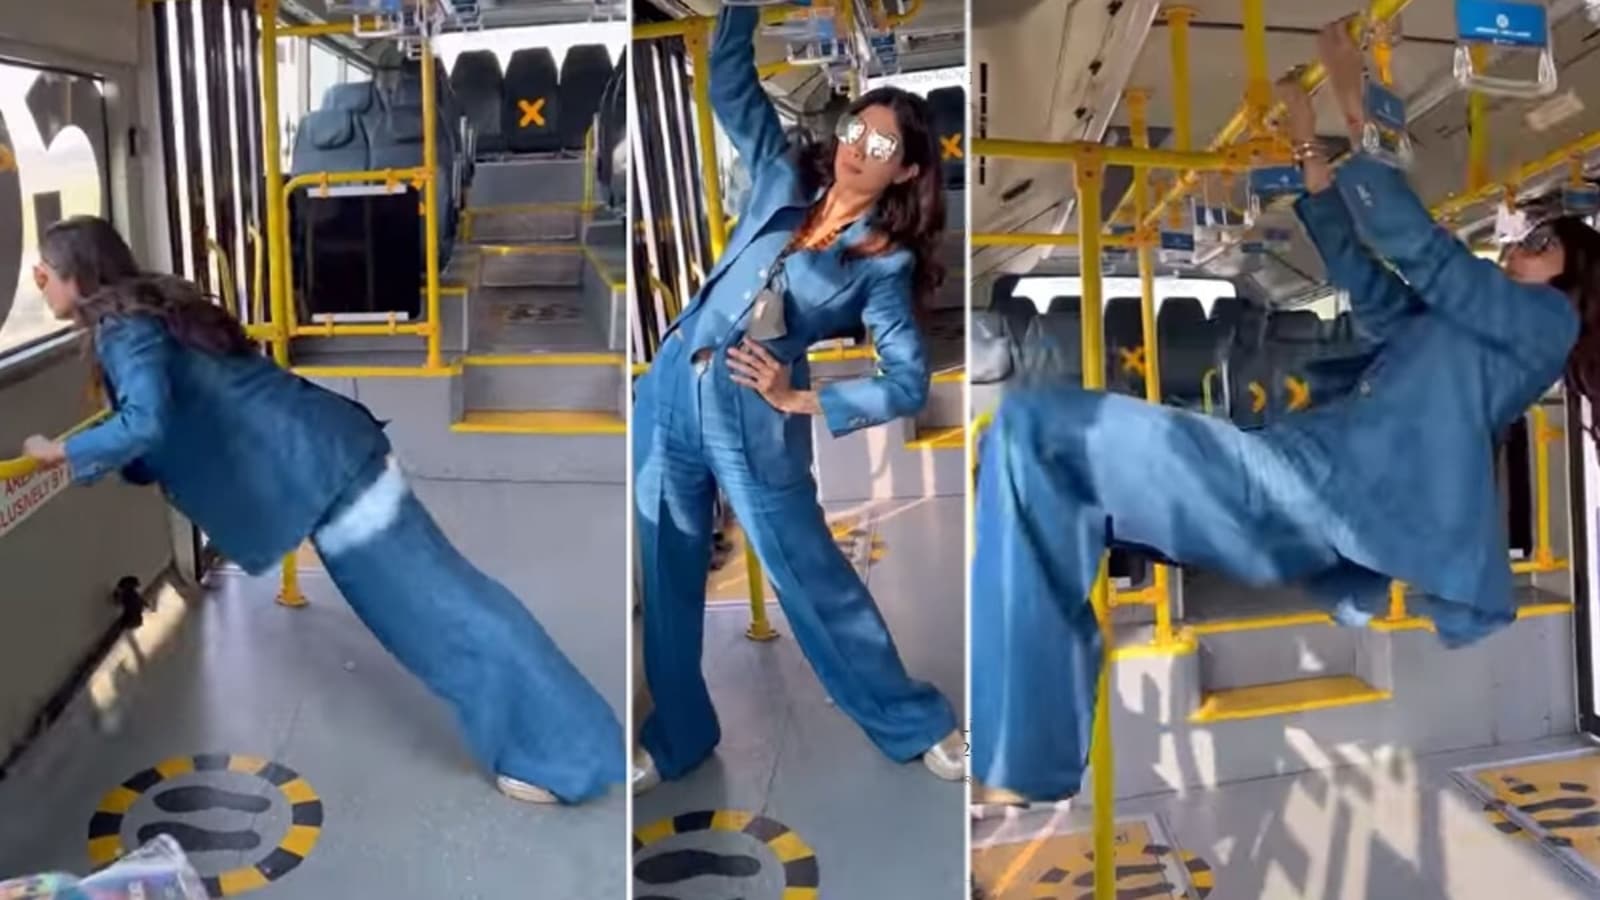 Shilpa Shetty works out in bus on way to catch a flight. Watch | Bollywood  - Hindustan Times